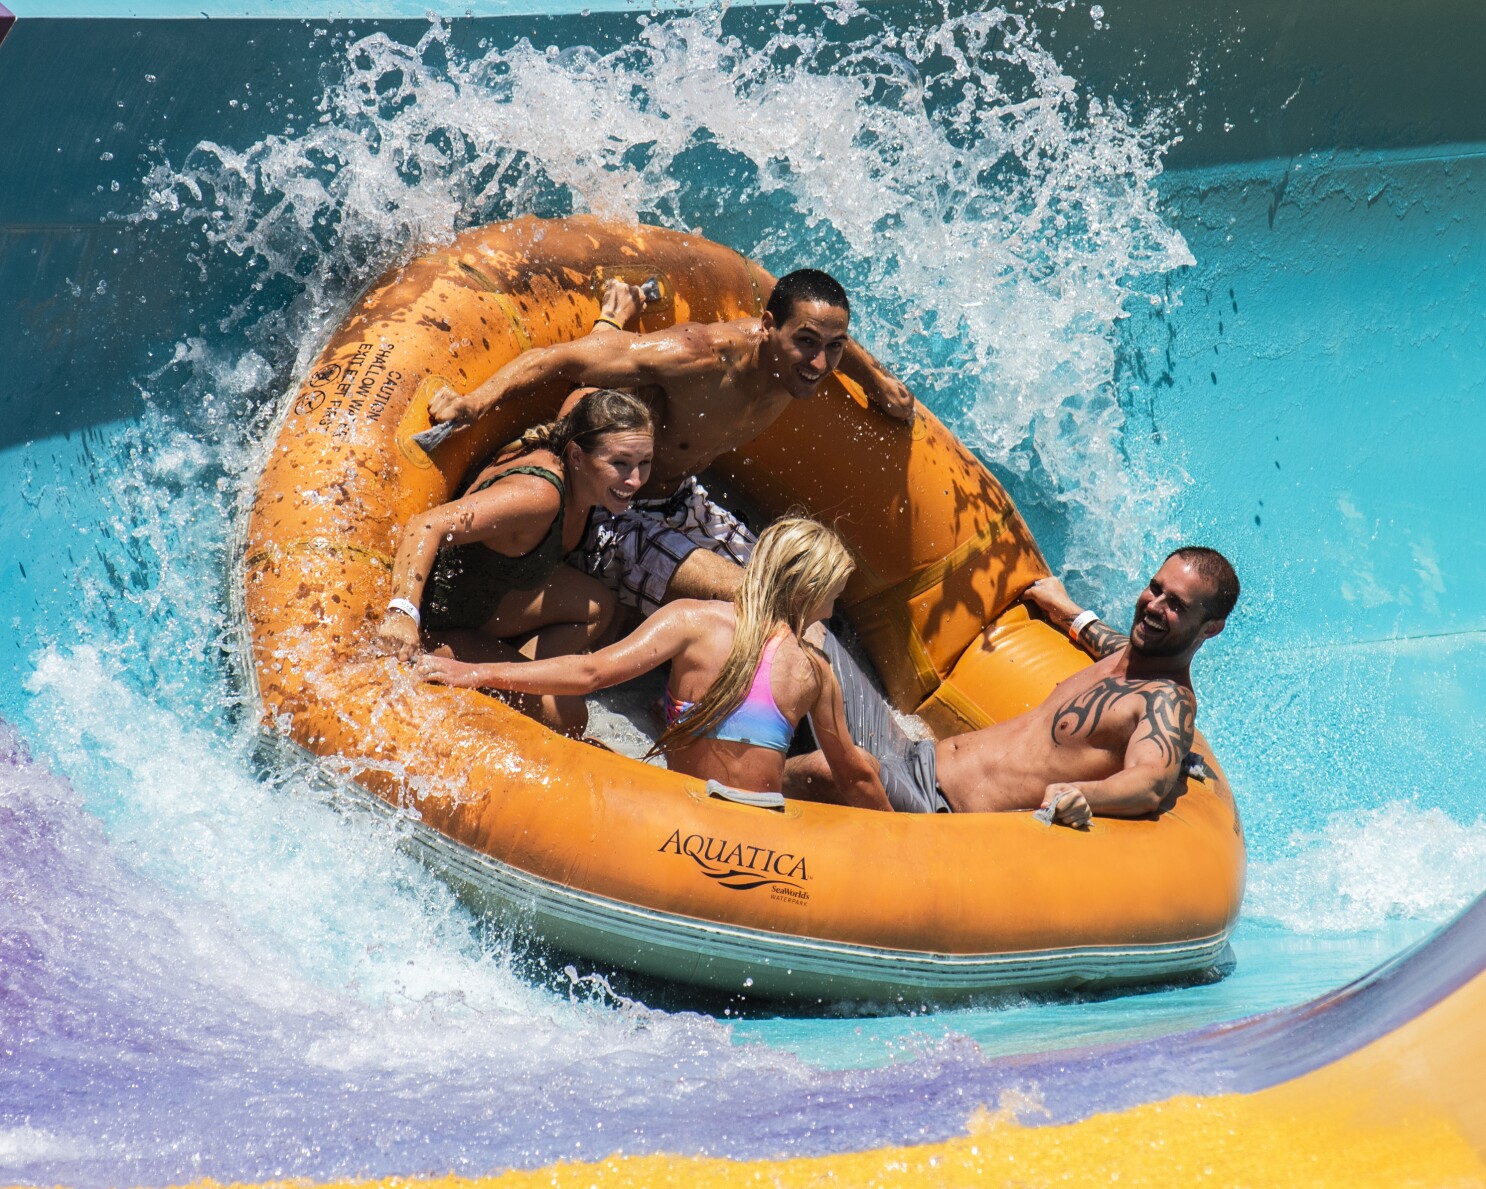 Aquatica Water Park Reopening In Chula Vista After Nearly 2 Year Hiatus The San Diego Union Tribune